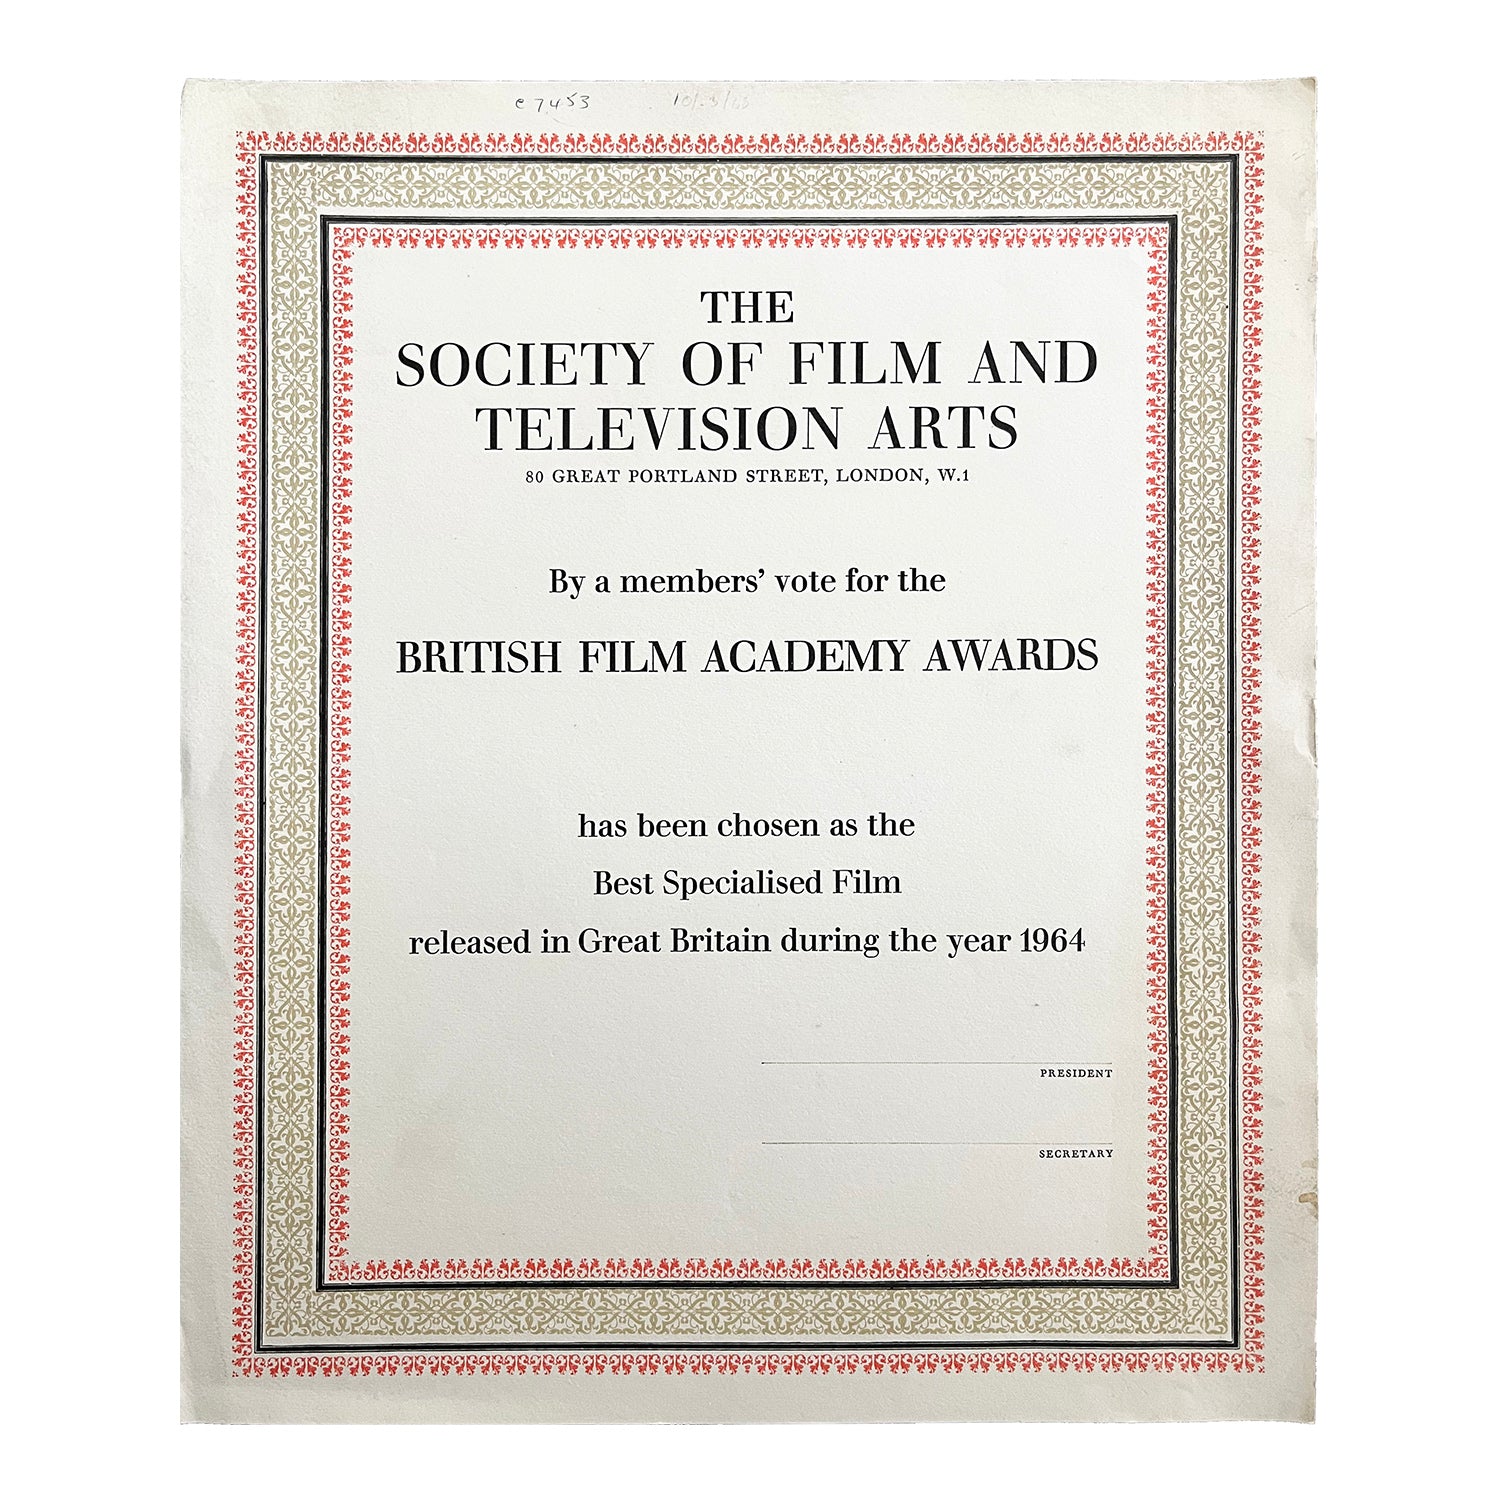 original unissued proof certificate for the British Academy Awards, Best Specialised Film released in Great Britain during the year 1964